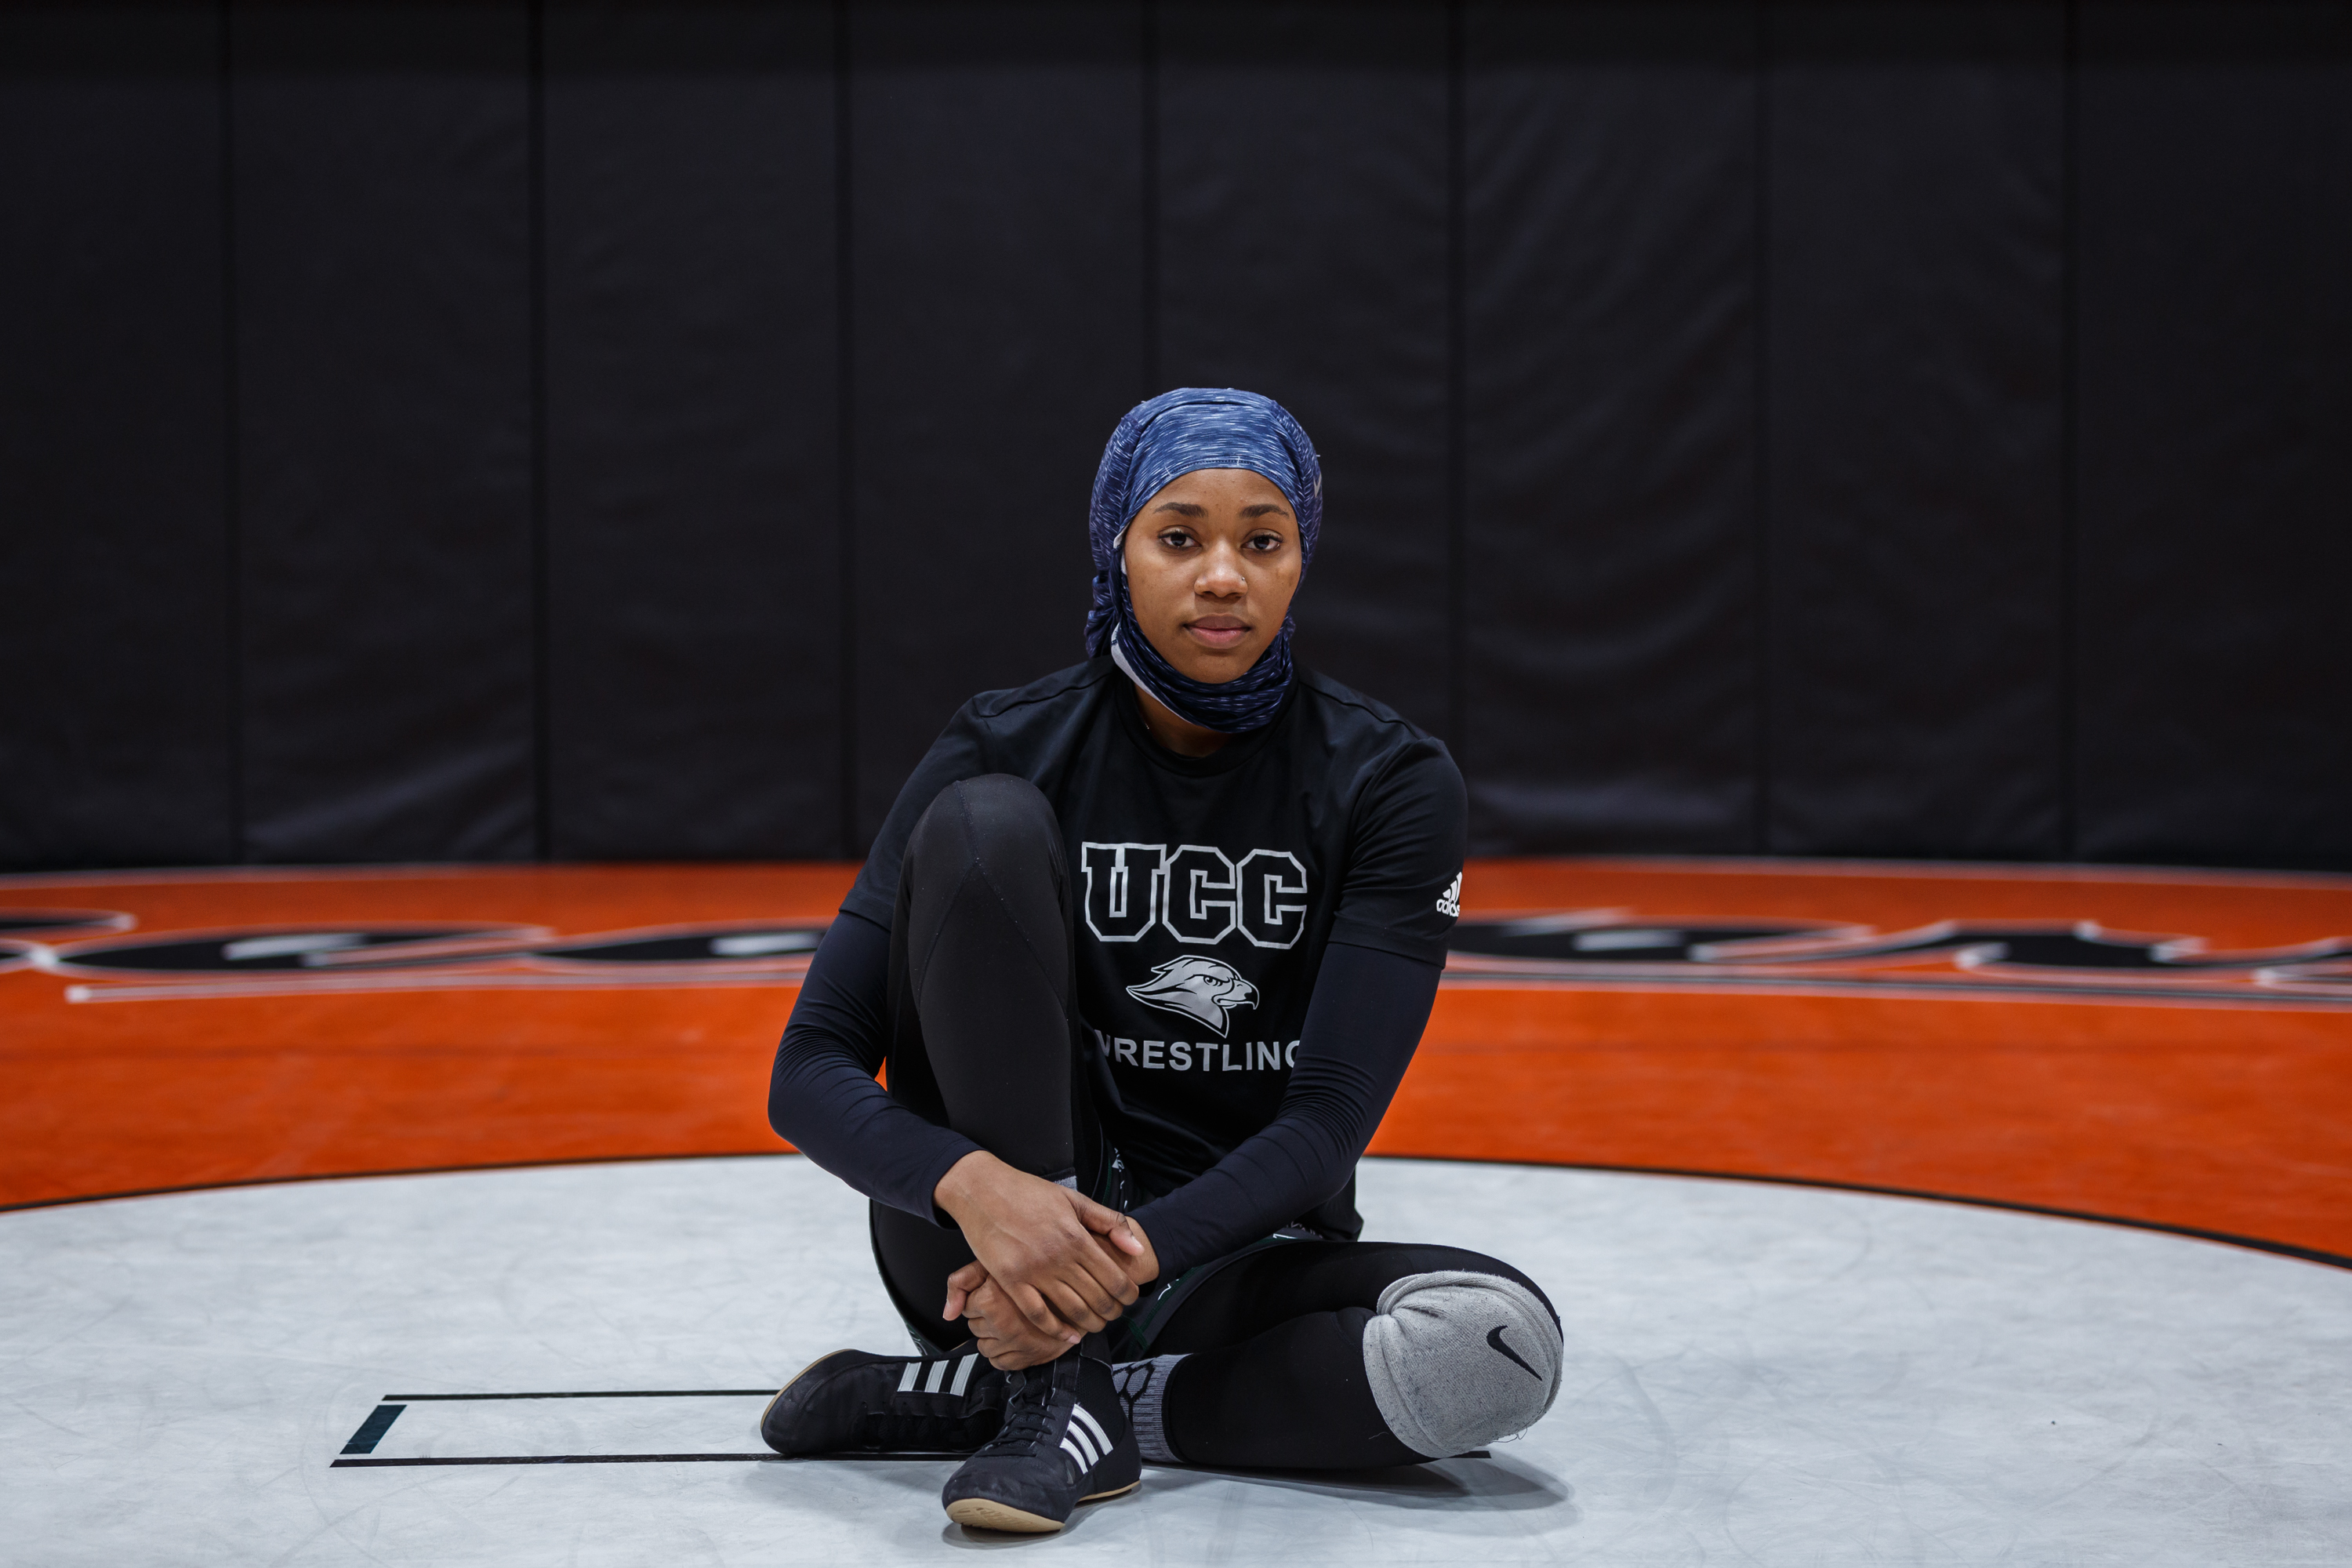 Muslim Women Wrestlers Say They Face Discrimination HuffPost Women photo